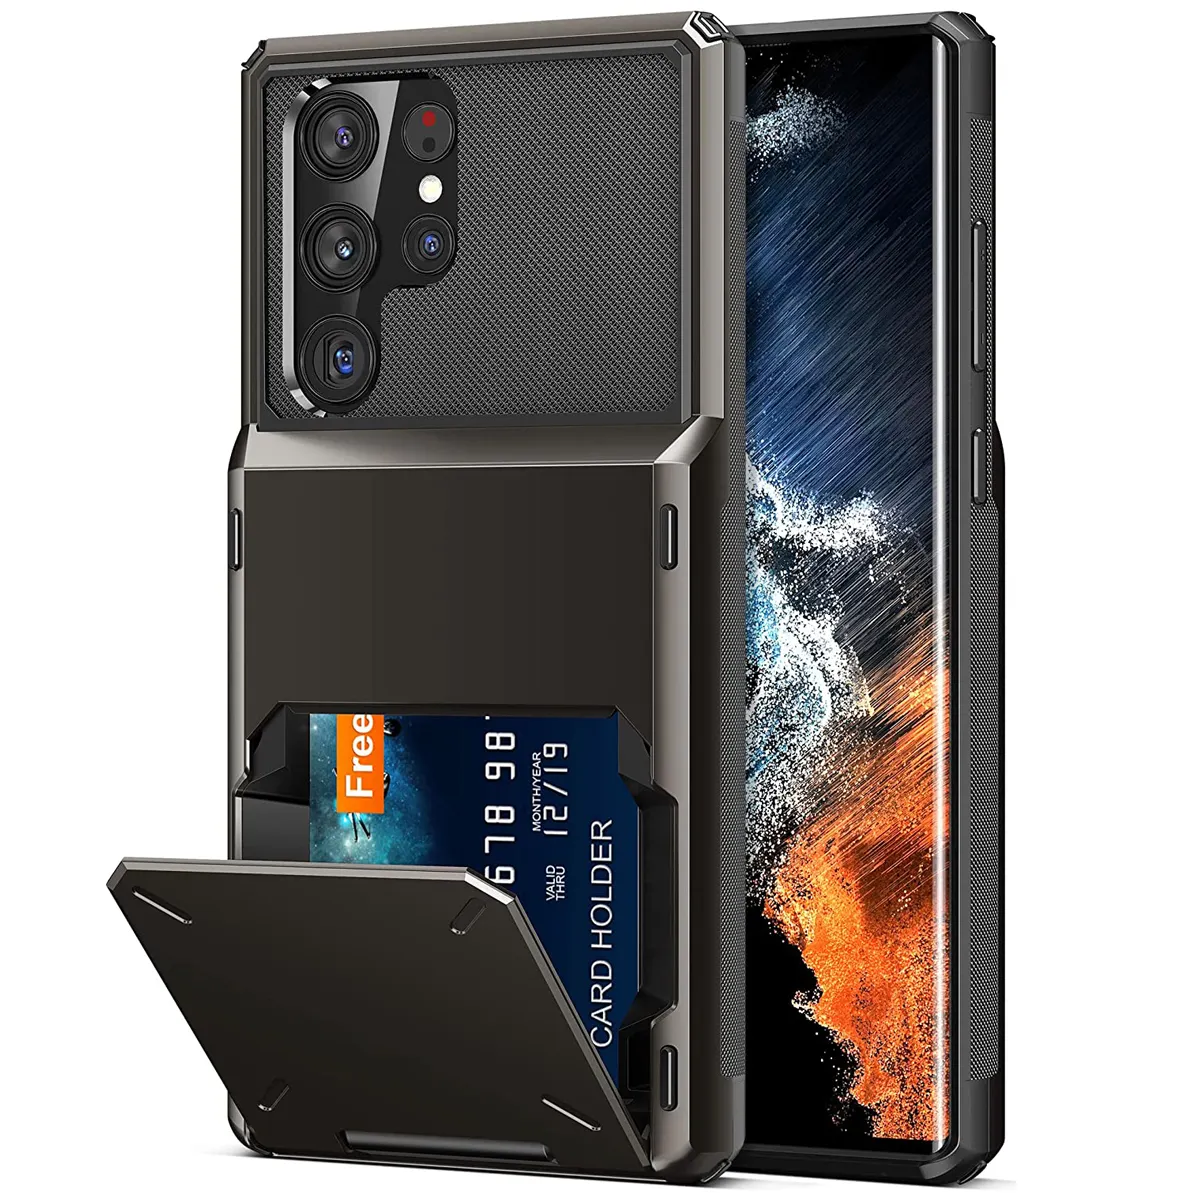 Slide Wallet Credit Card Slot Phone Case For Huawei P40 P30 P20 Pro P30 Lite p smart 2019 TPU Armor Shockproof Back Cover